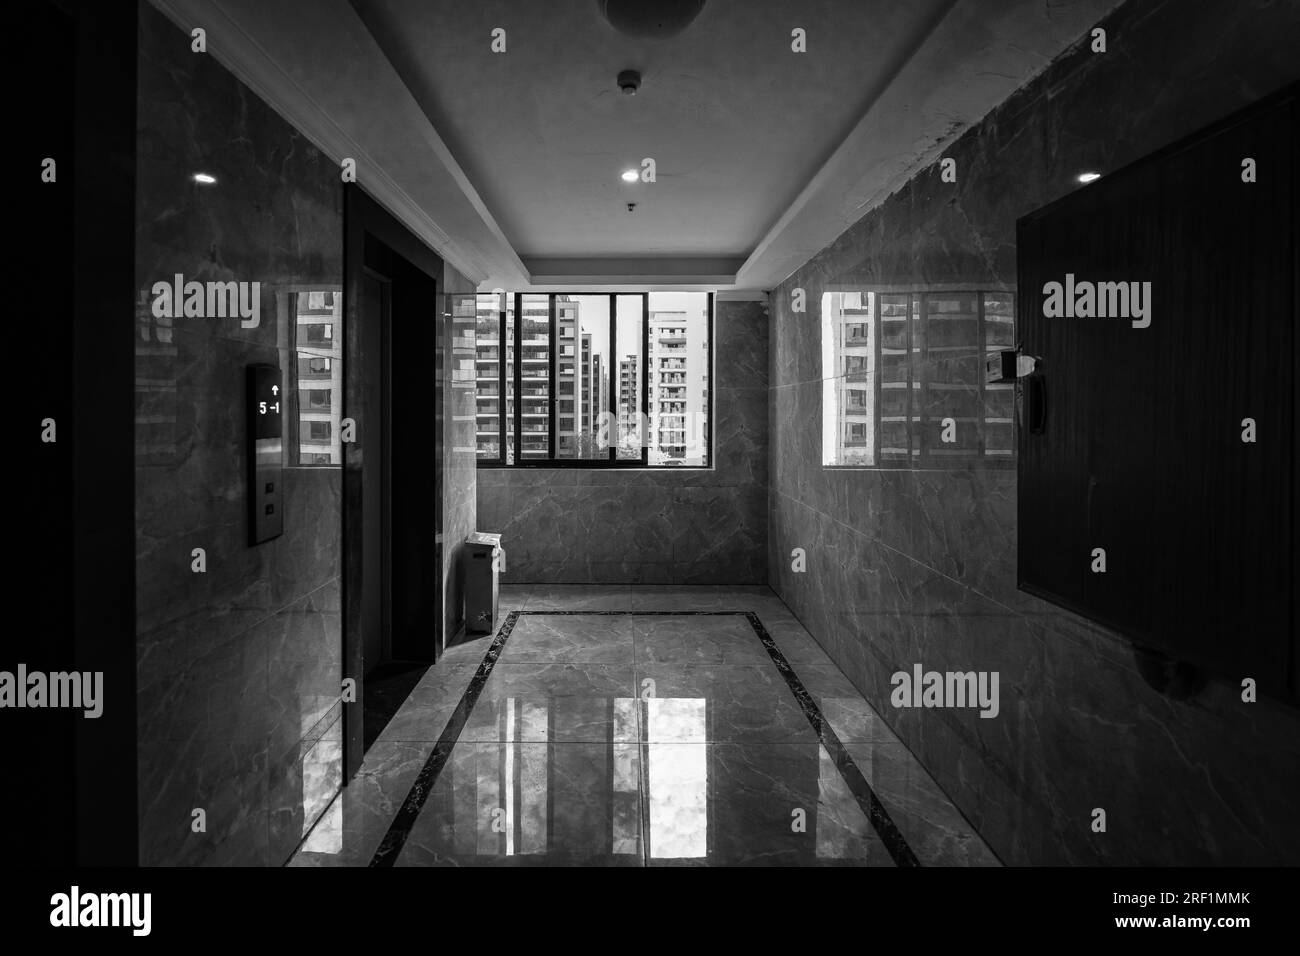 The sunny day interior of the apartment building hallway. Stock Photo